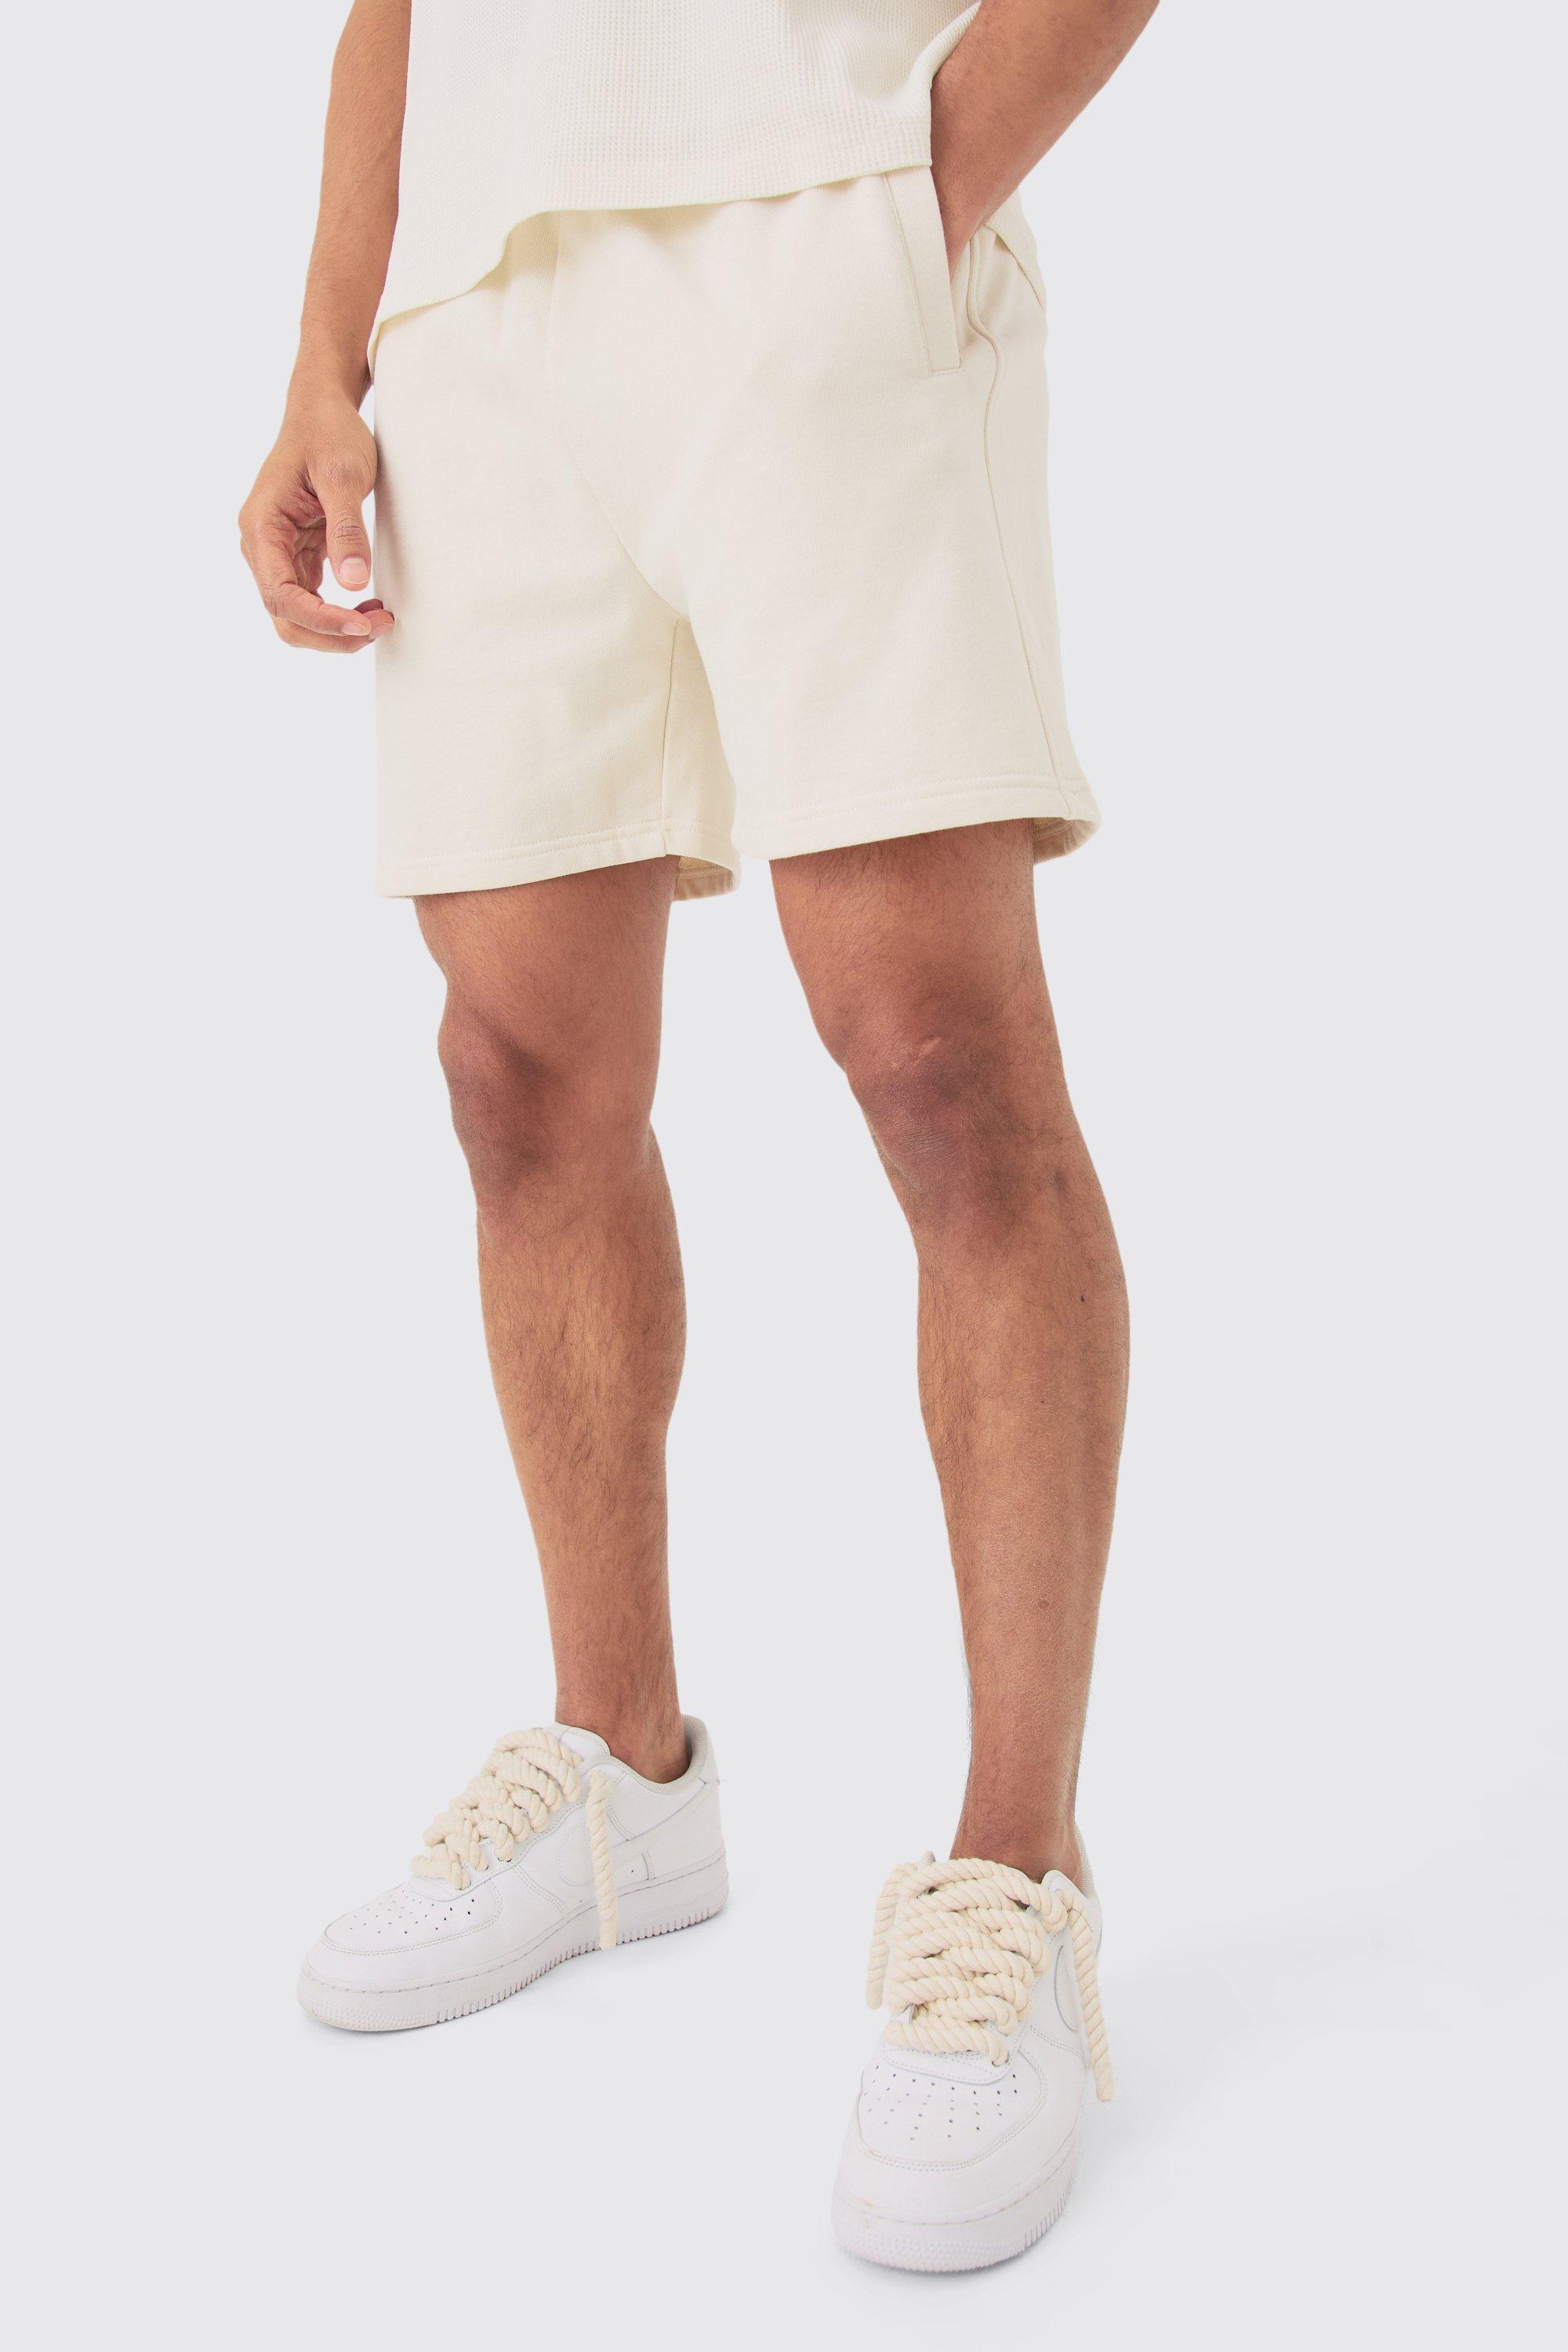 Image of Relaxed Fit Short Length Heavyweight Short, Cream